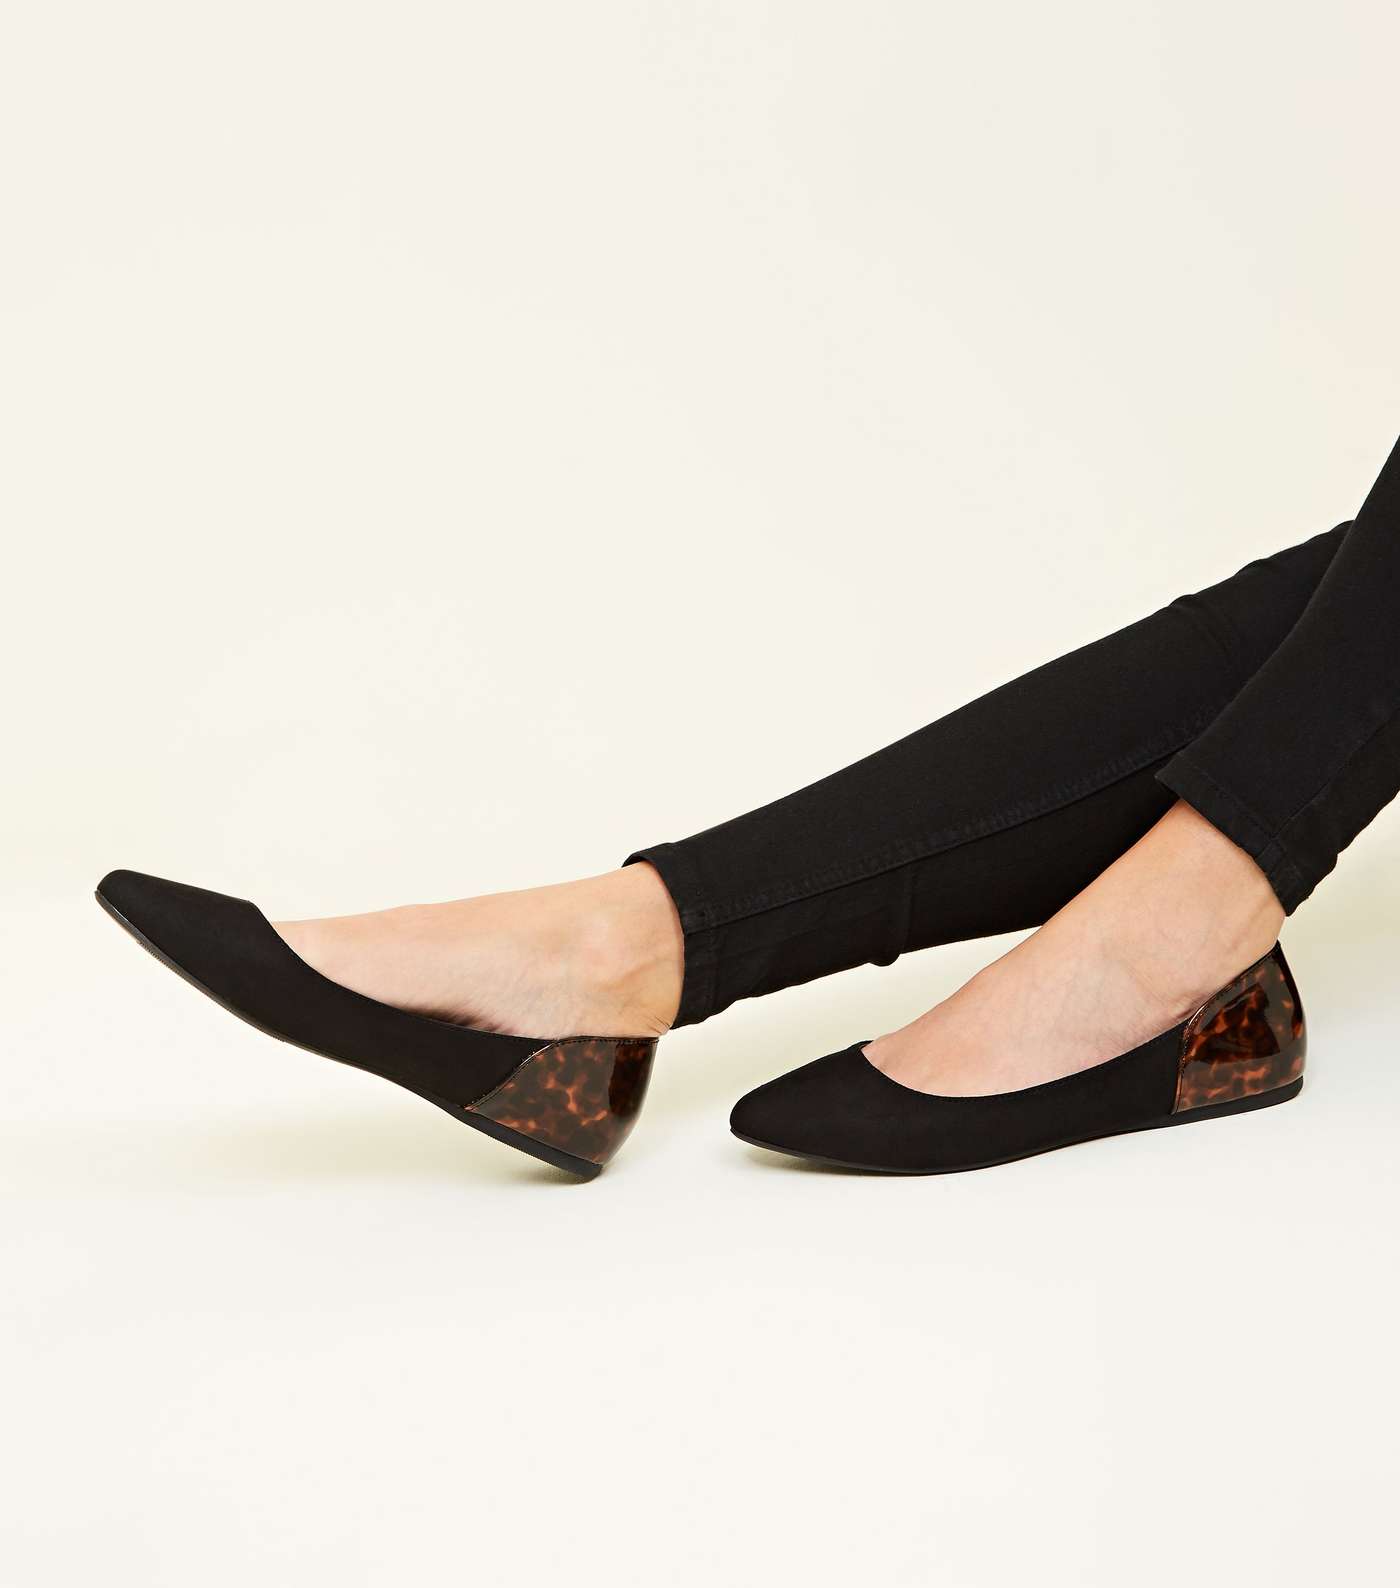 Wide Fit Black and Patent Tortoiseshell Pumps Image 2